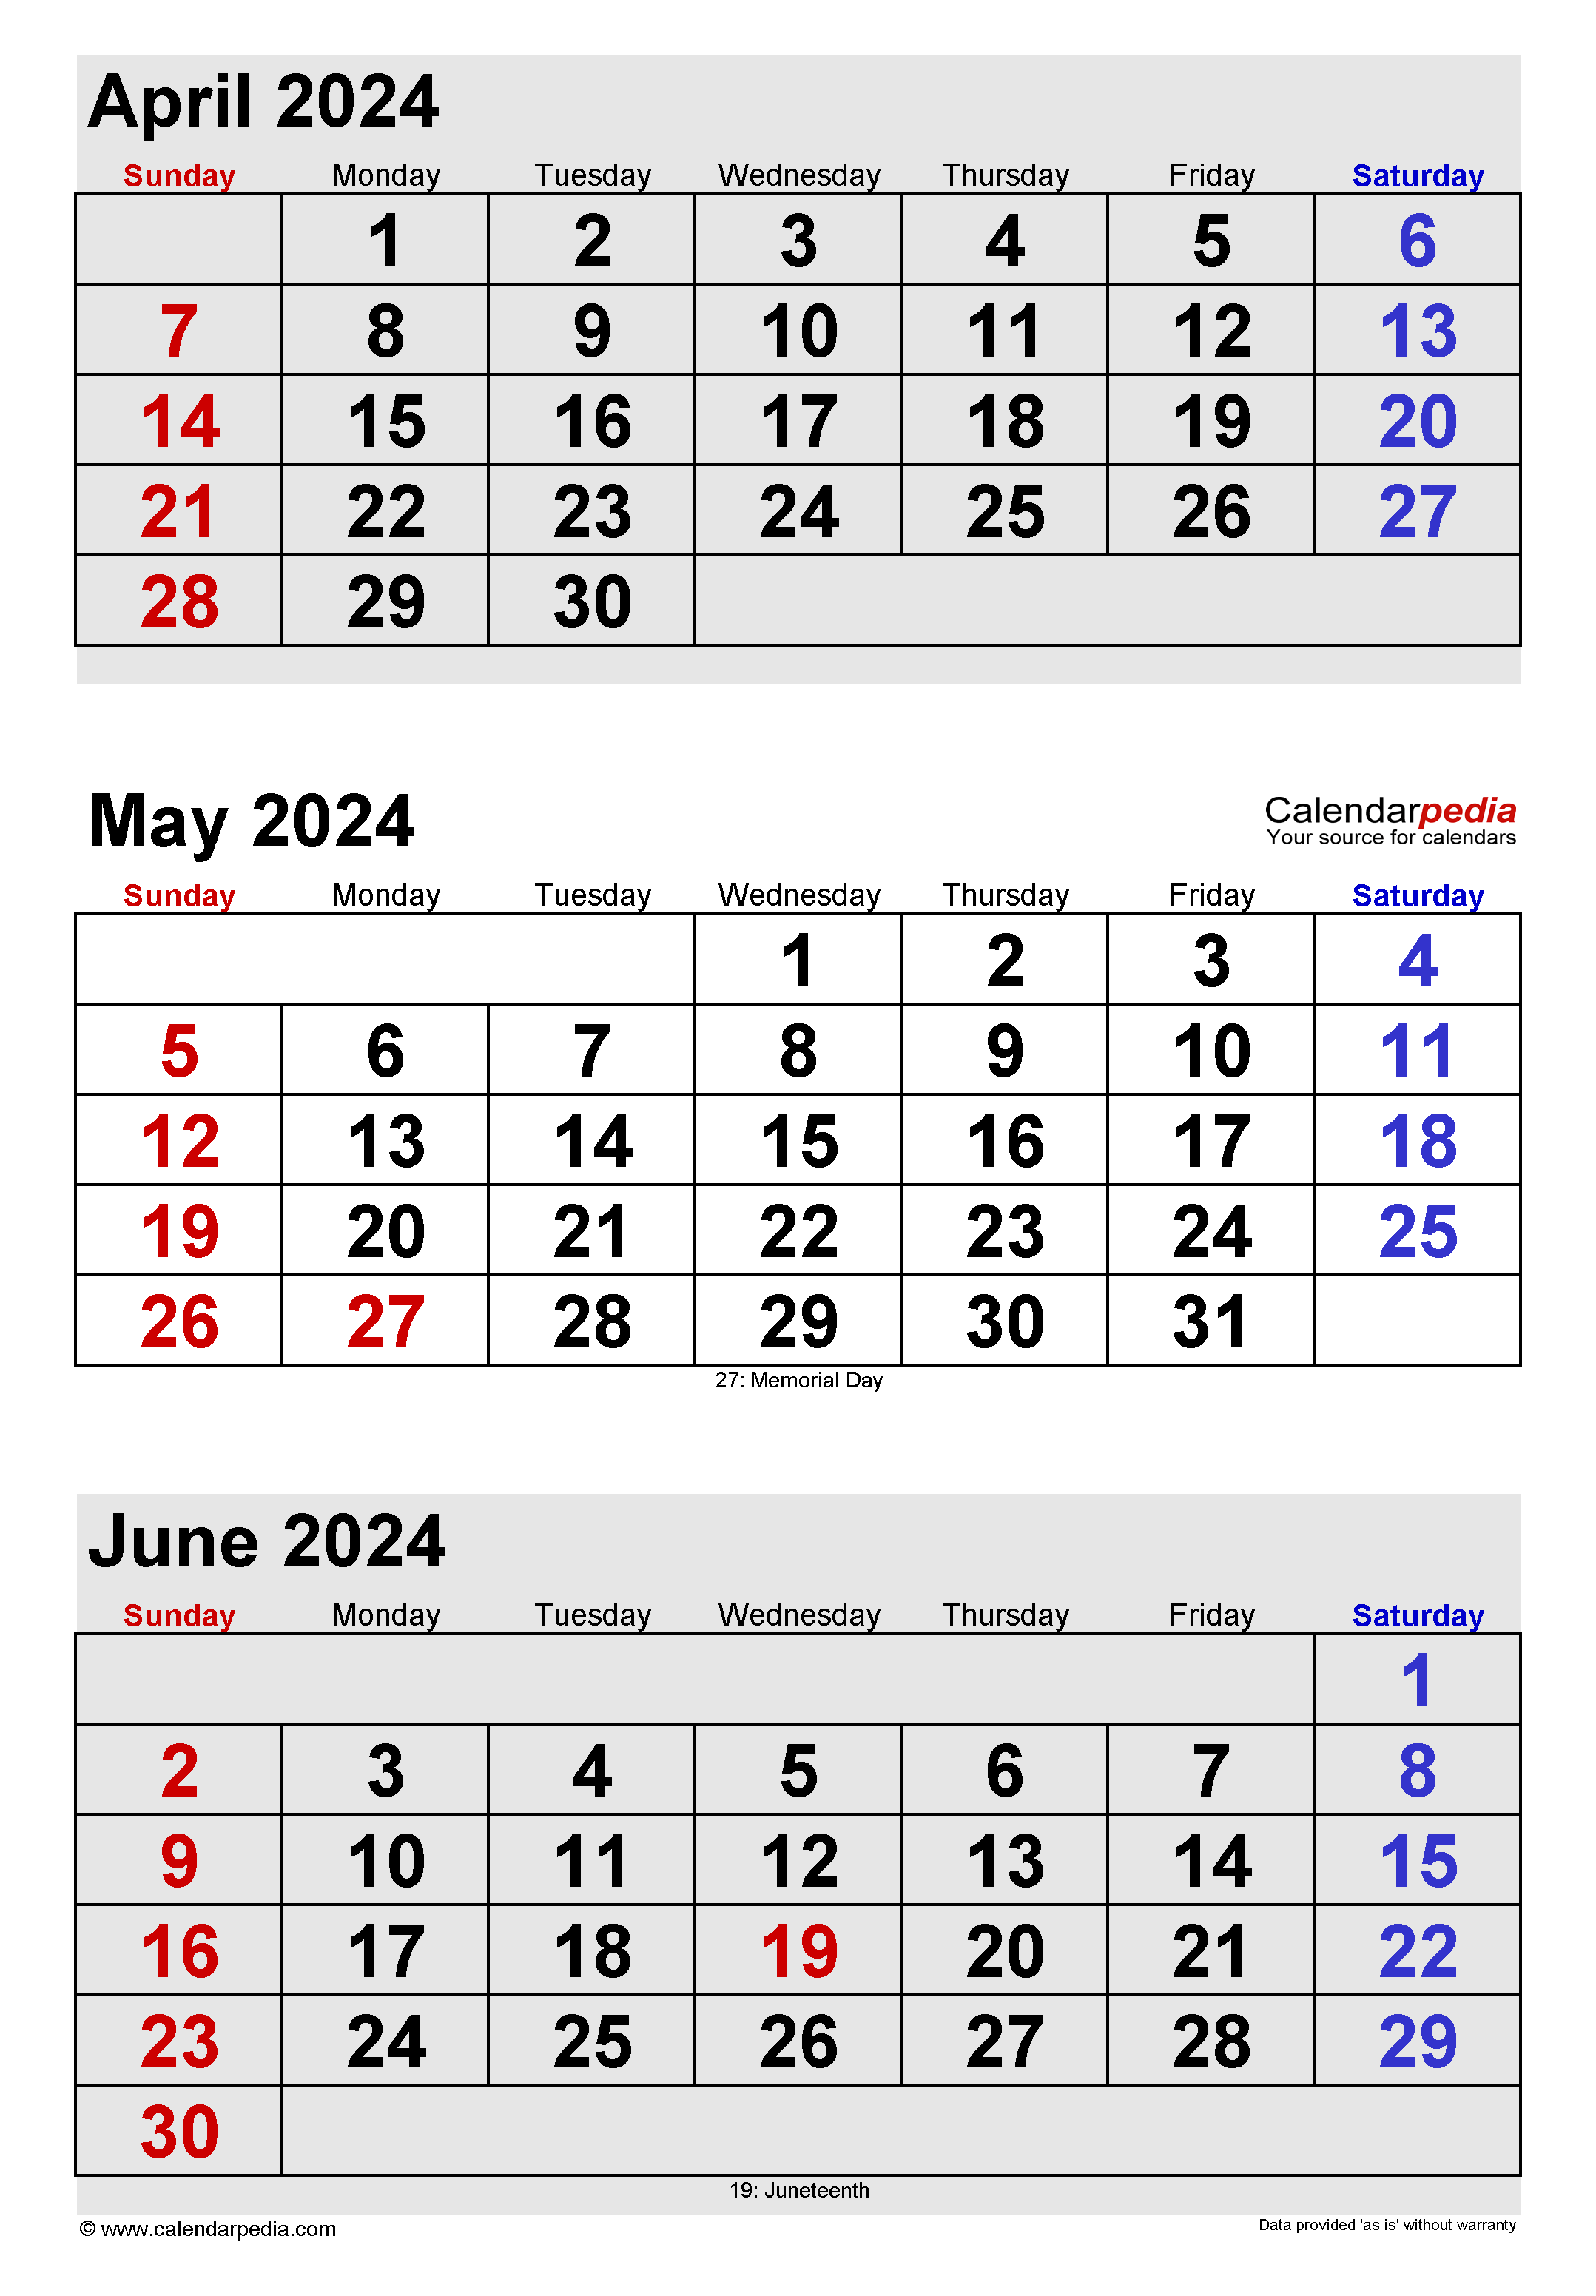 May 2024 Calendar | Templates For Word, Excel And Pdf intended for Calendar April May 2024